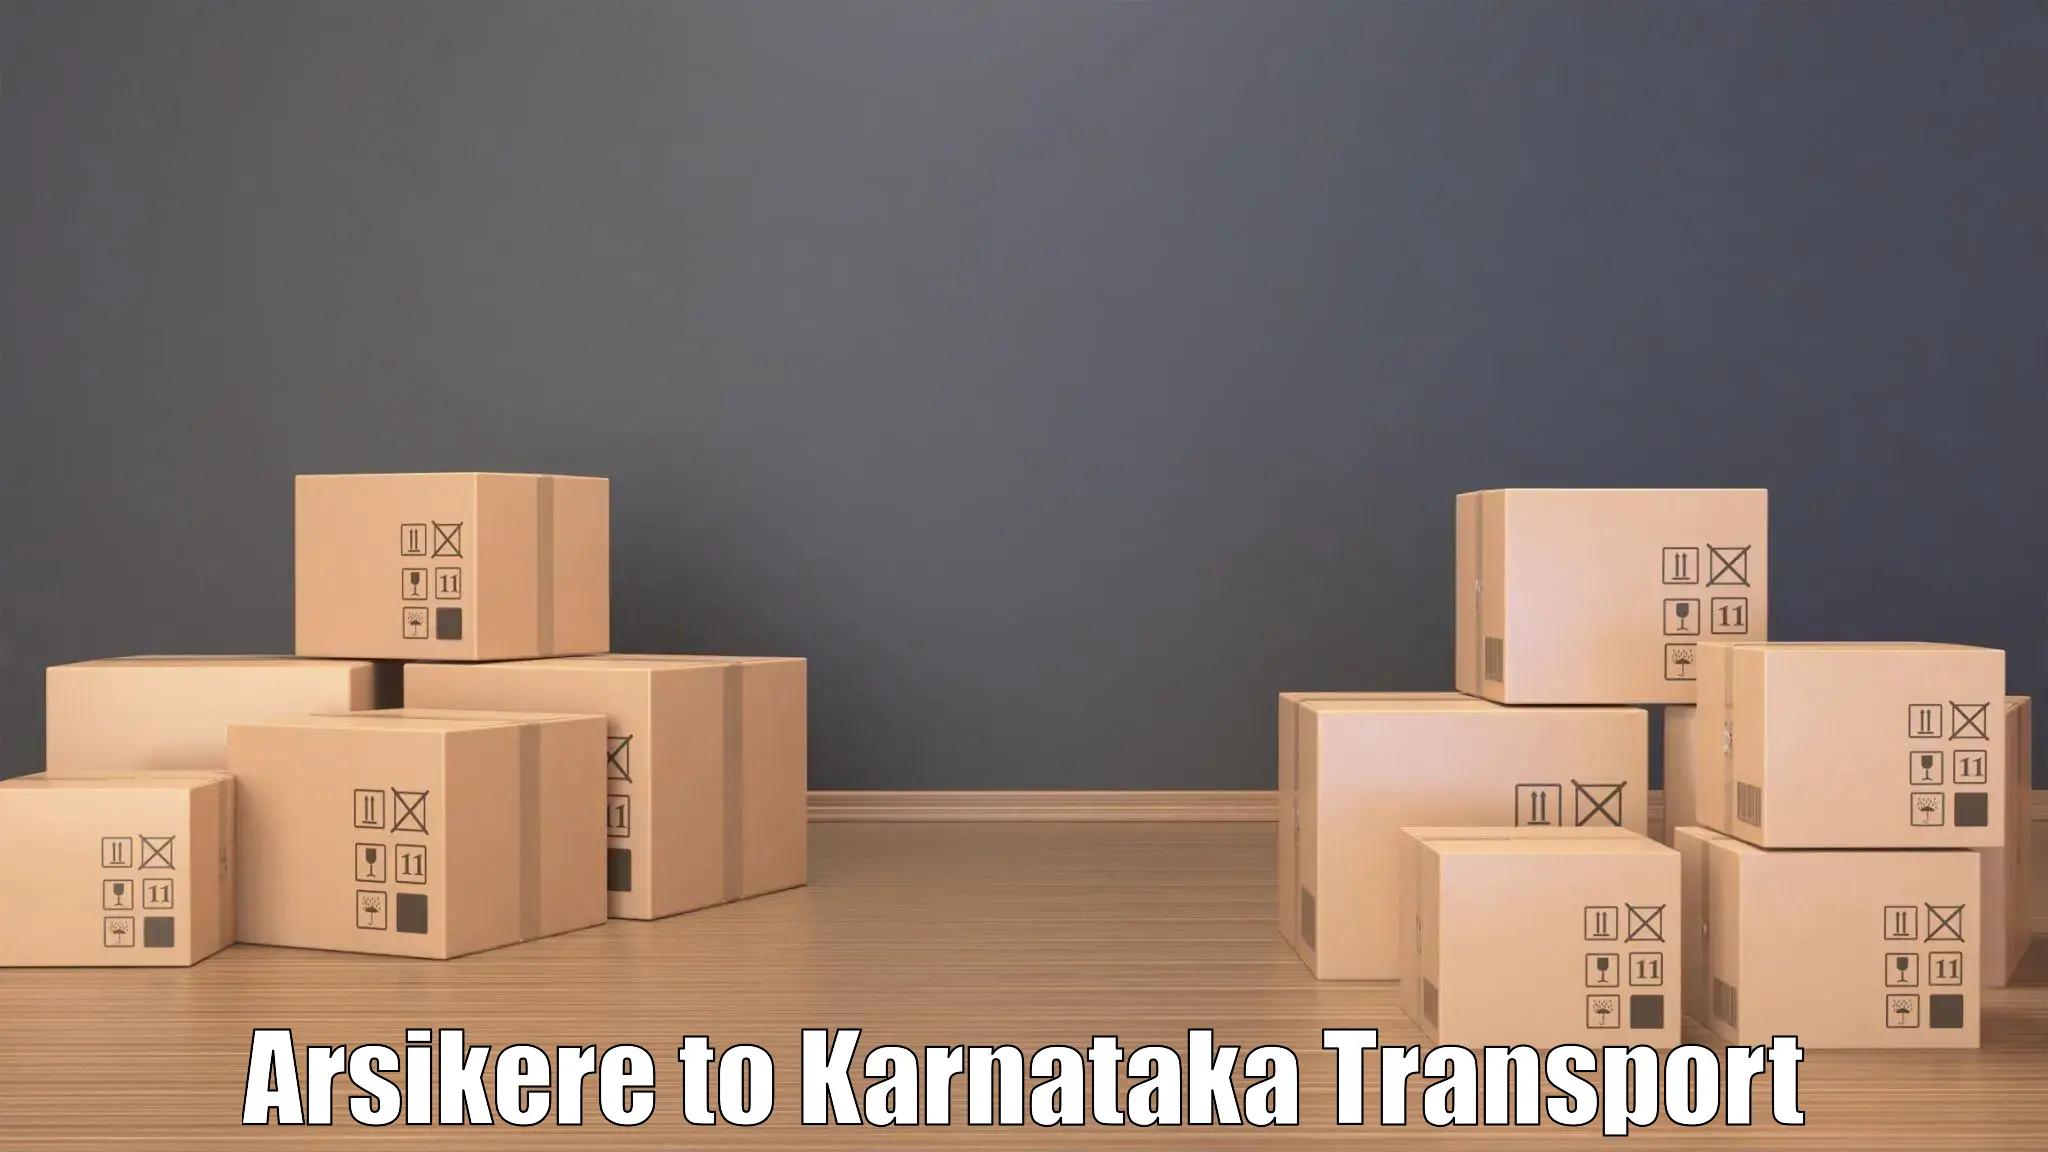 Truck transport companies in India Arsikere to Mangalore Port